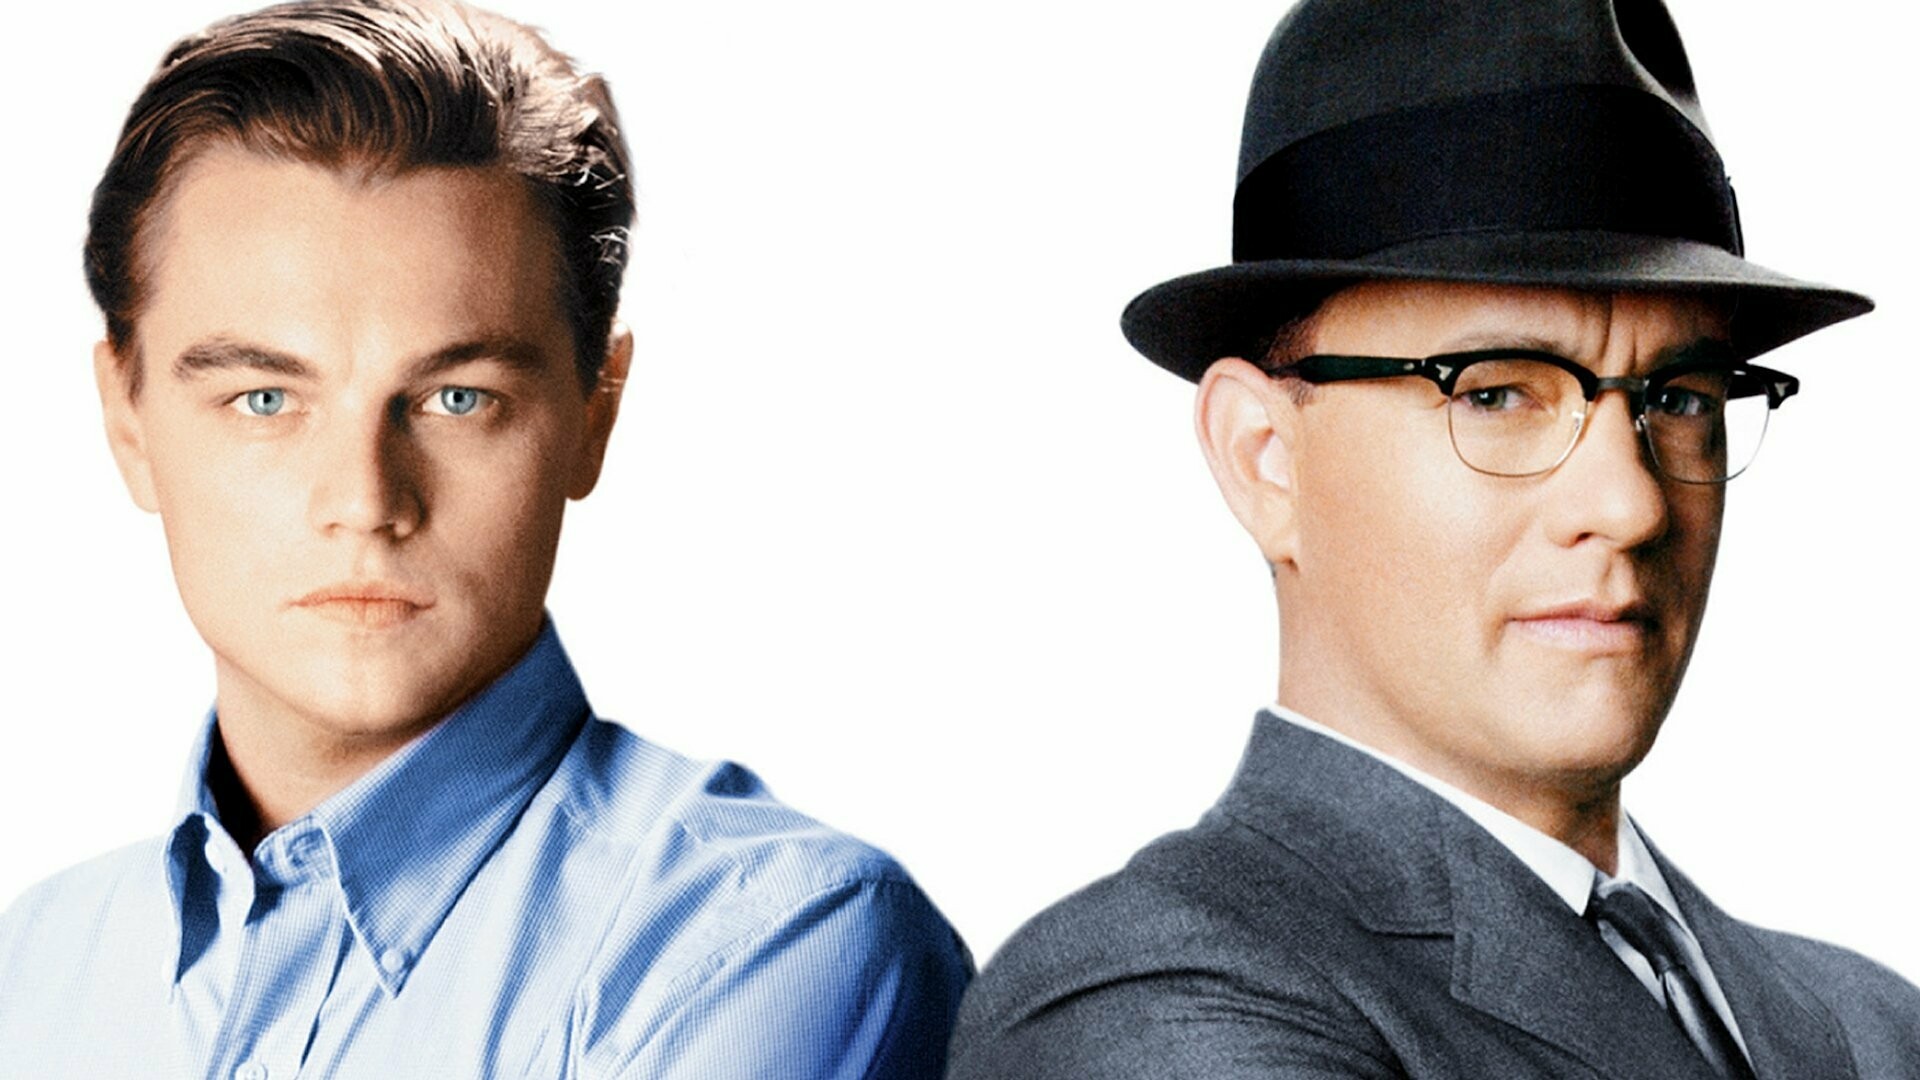 Catch Me If You Can: Frank Abagnale and Carl Hanratty, Screenplay by Jeff Nathanson. 1920x1080 Full HD Wallpaper.